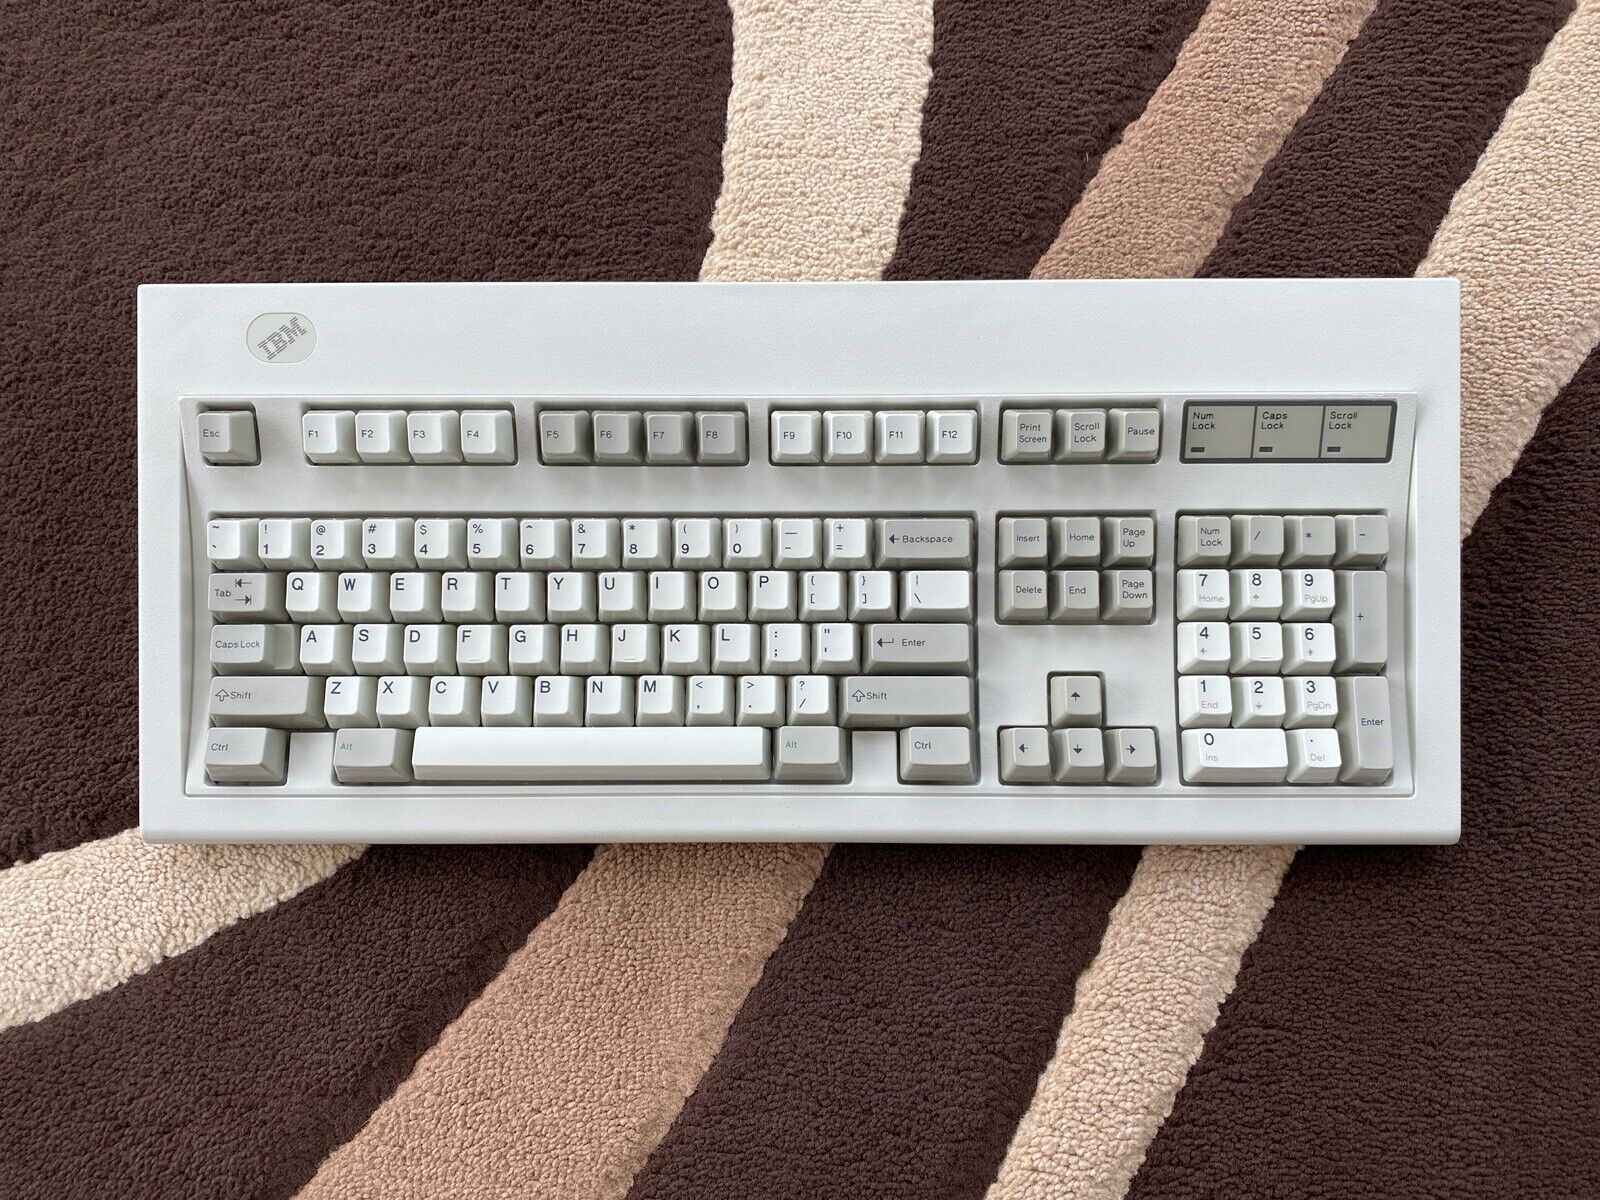 RESTOCKED REPLACEMENT IBM Model M F Keycaps PARTS AT XT M122 M101 4704 Keyboard